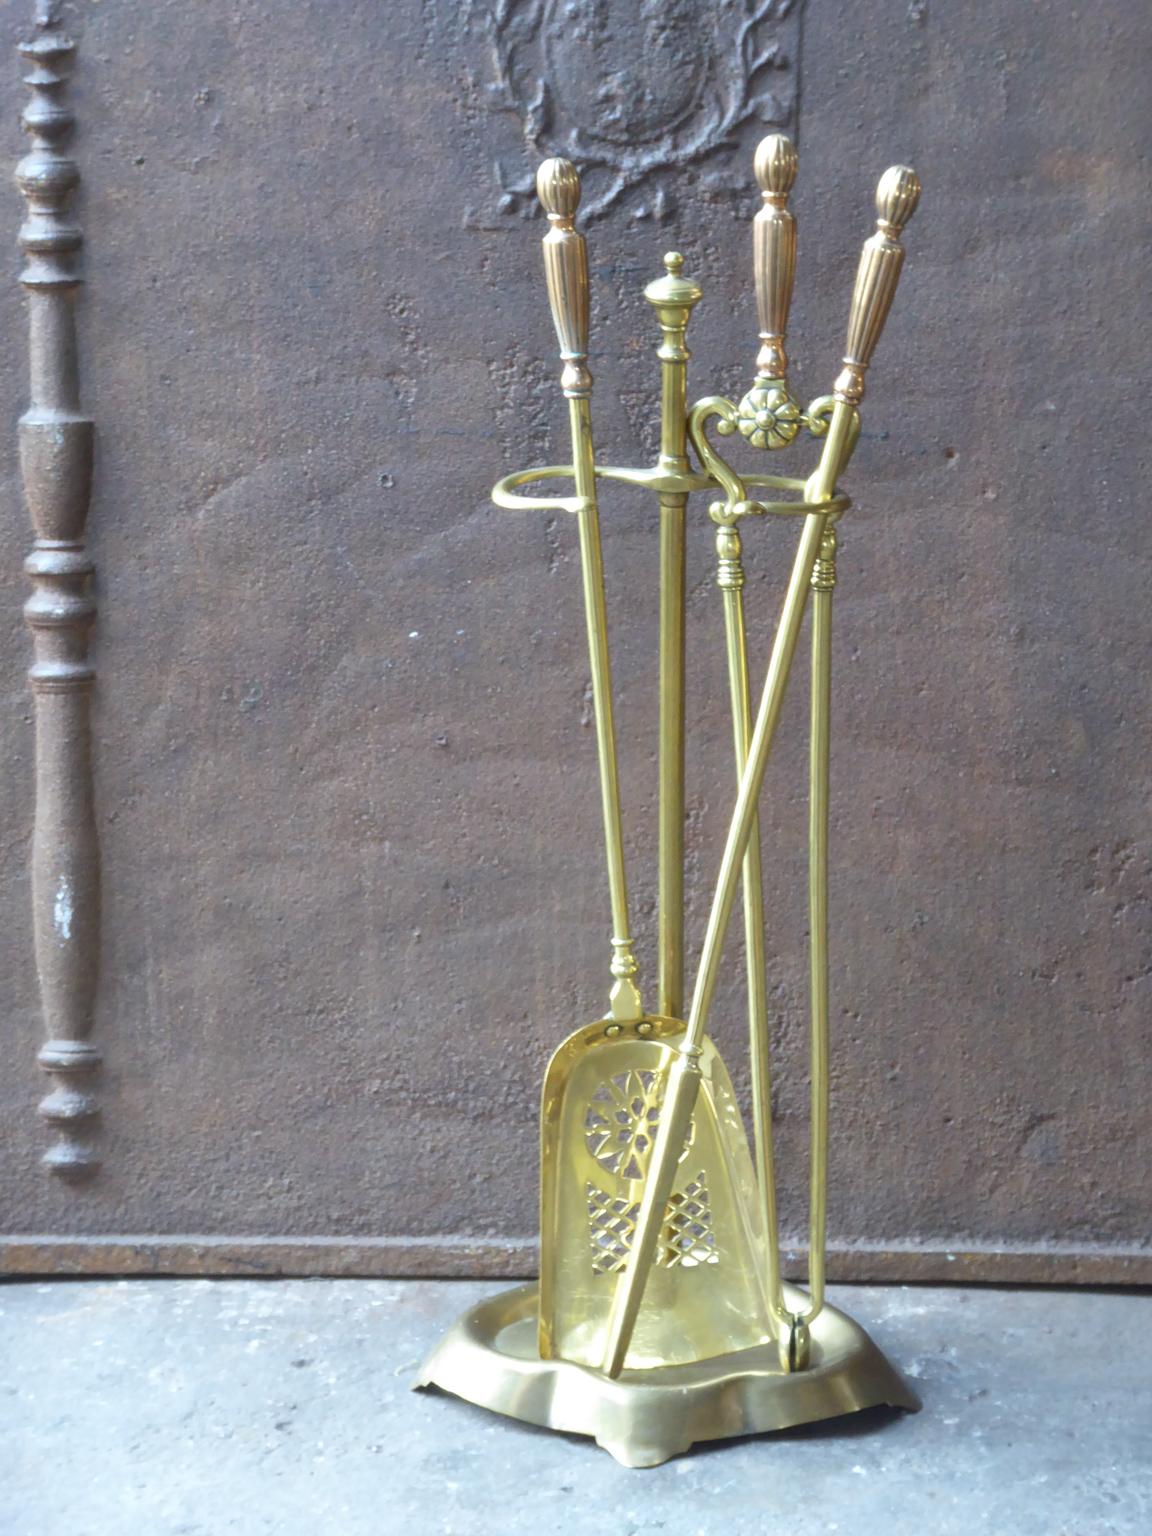 English set of three brass fireplace tools with copper handles and a brass stand. The fire tool set is in a good condition and is fully functional, 19th century, Victorian.